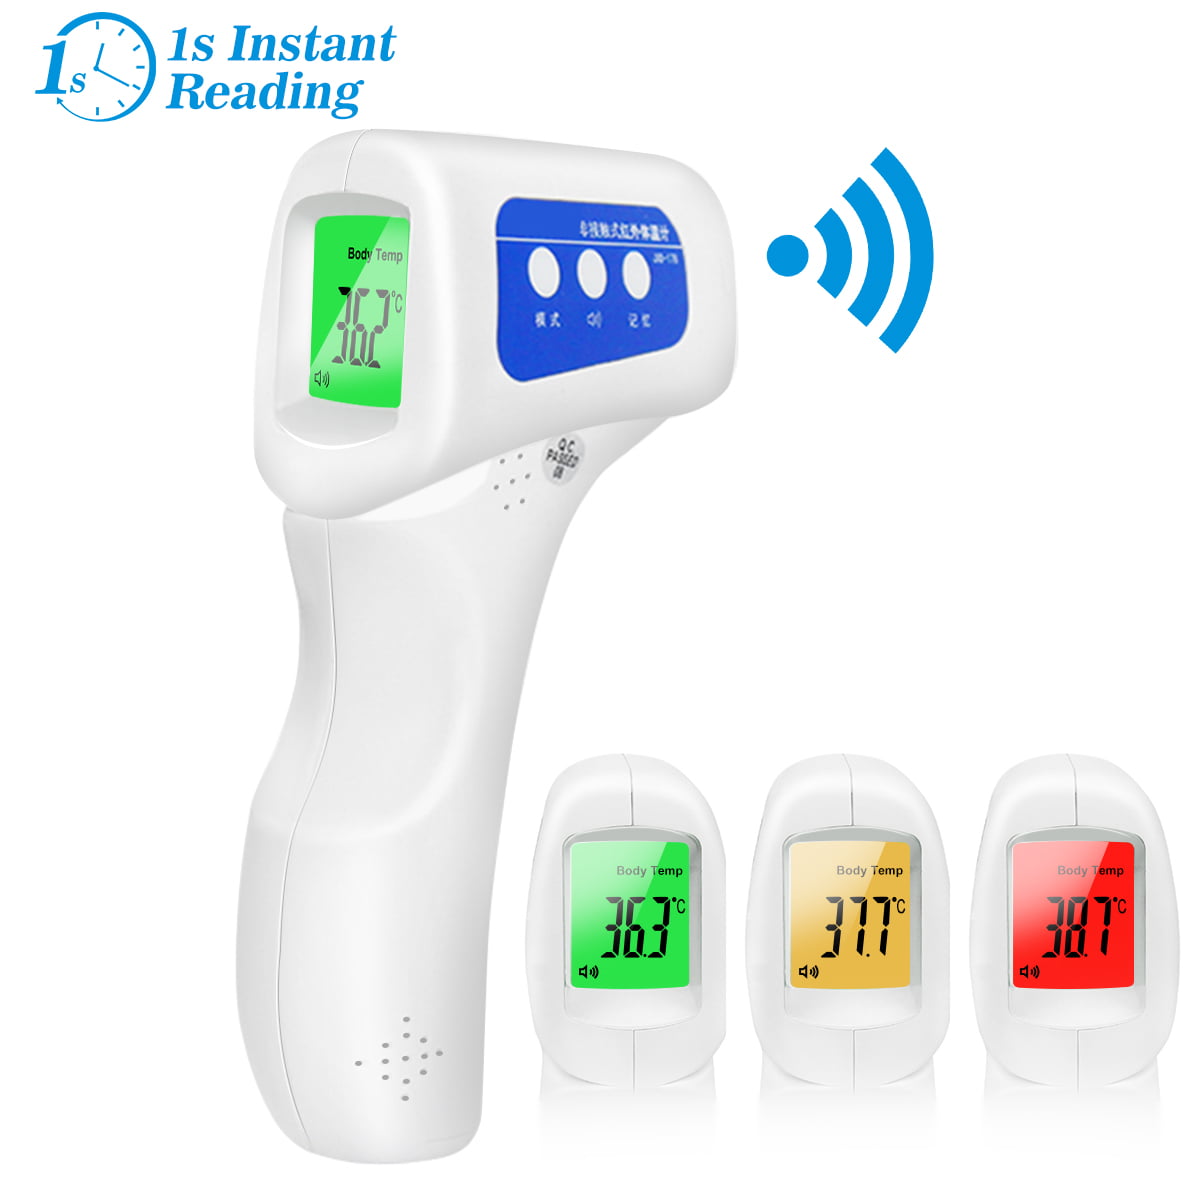 Multi-Temp 5 in 1 Thermometer infrared technology ear skin for children babies 